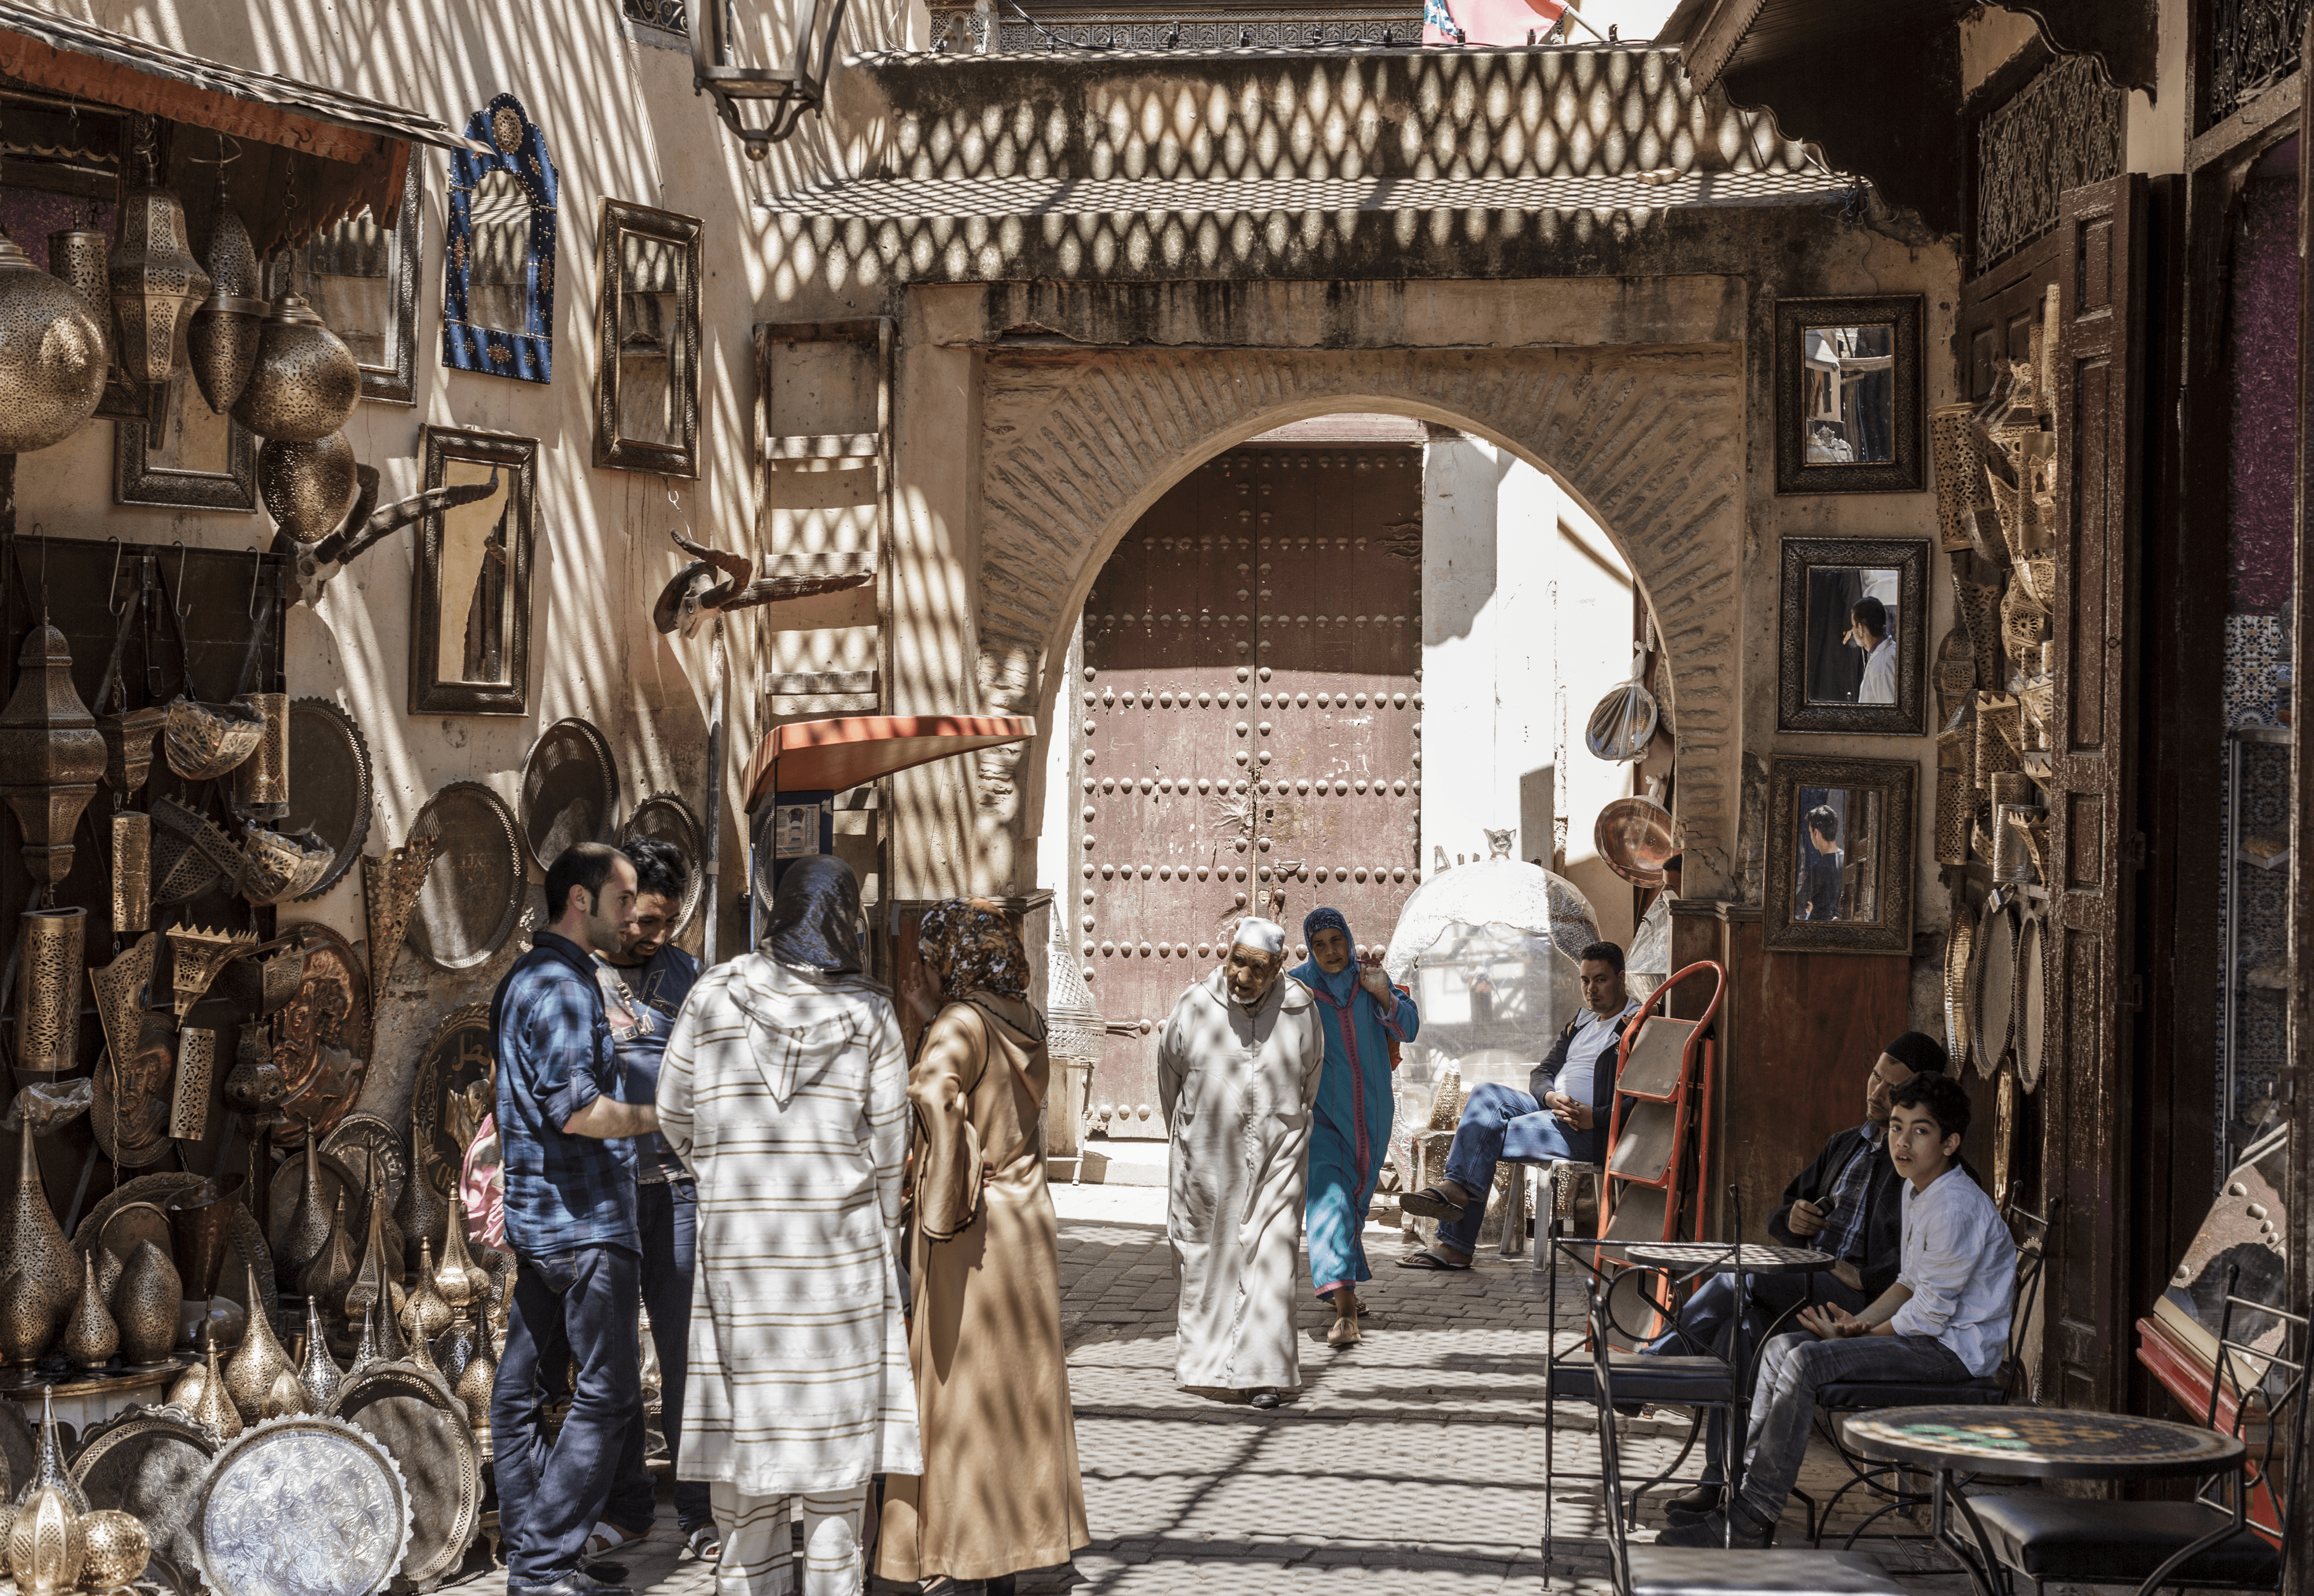 In the old town of Fès, Morocco